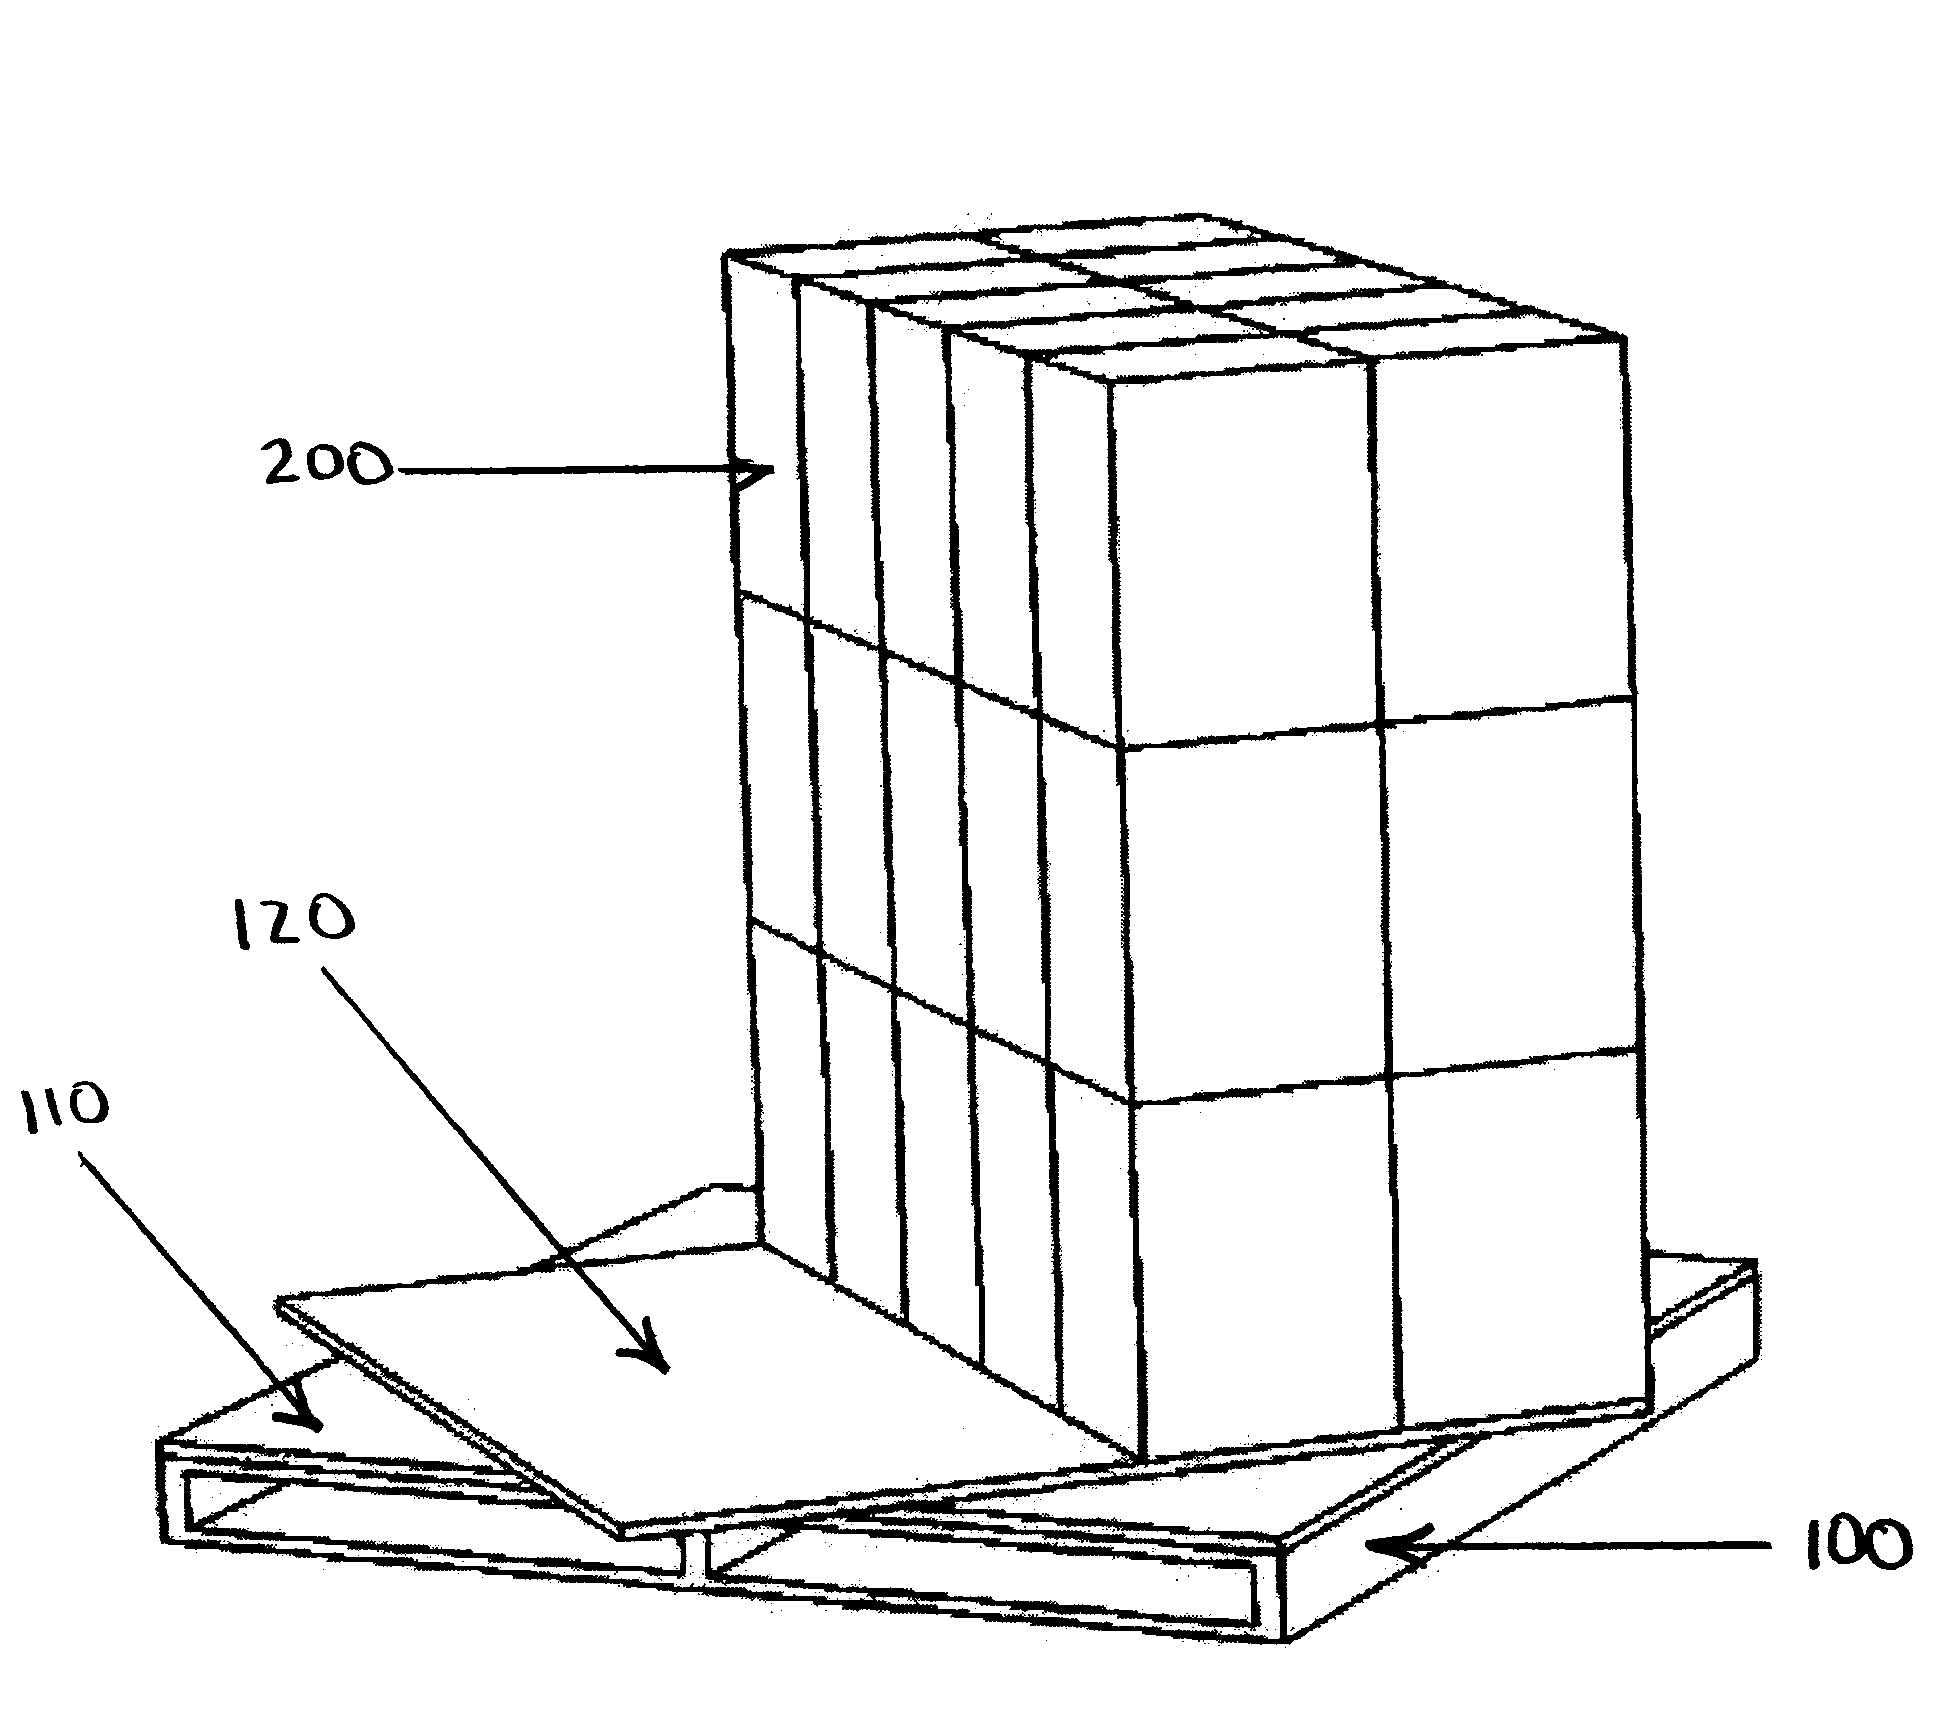 Method and apparatus for rotating articles on a pallet